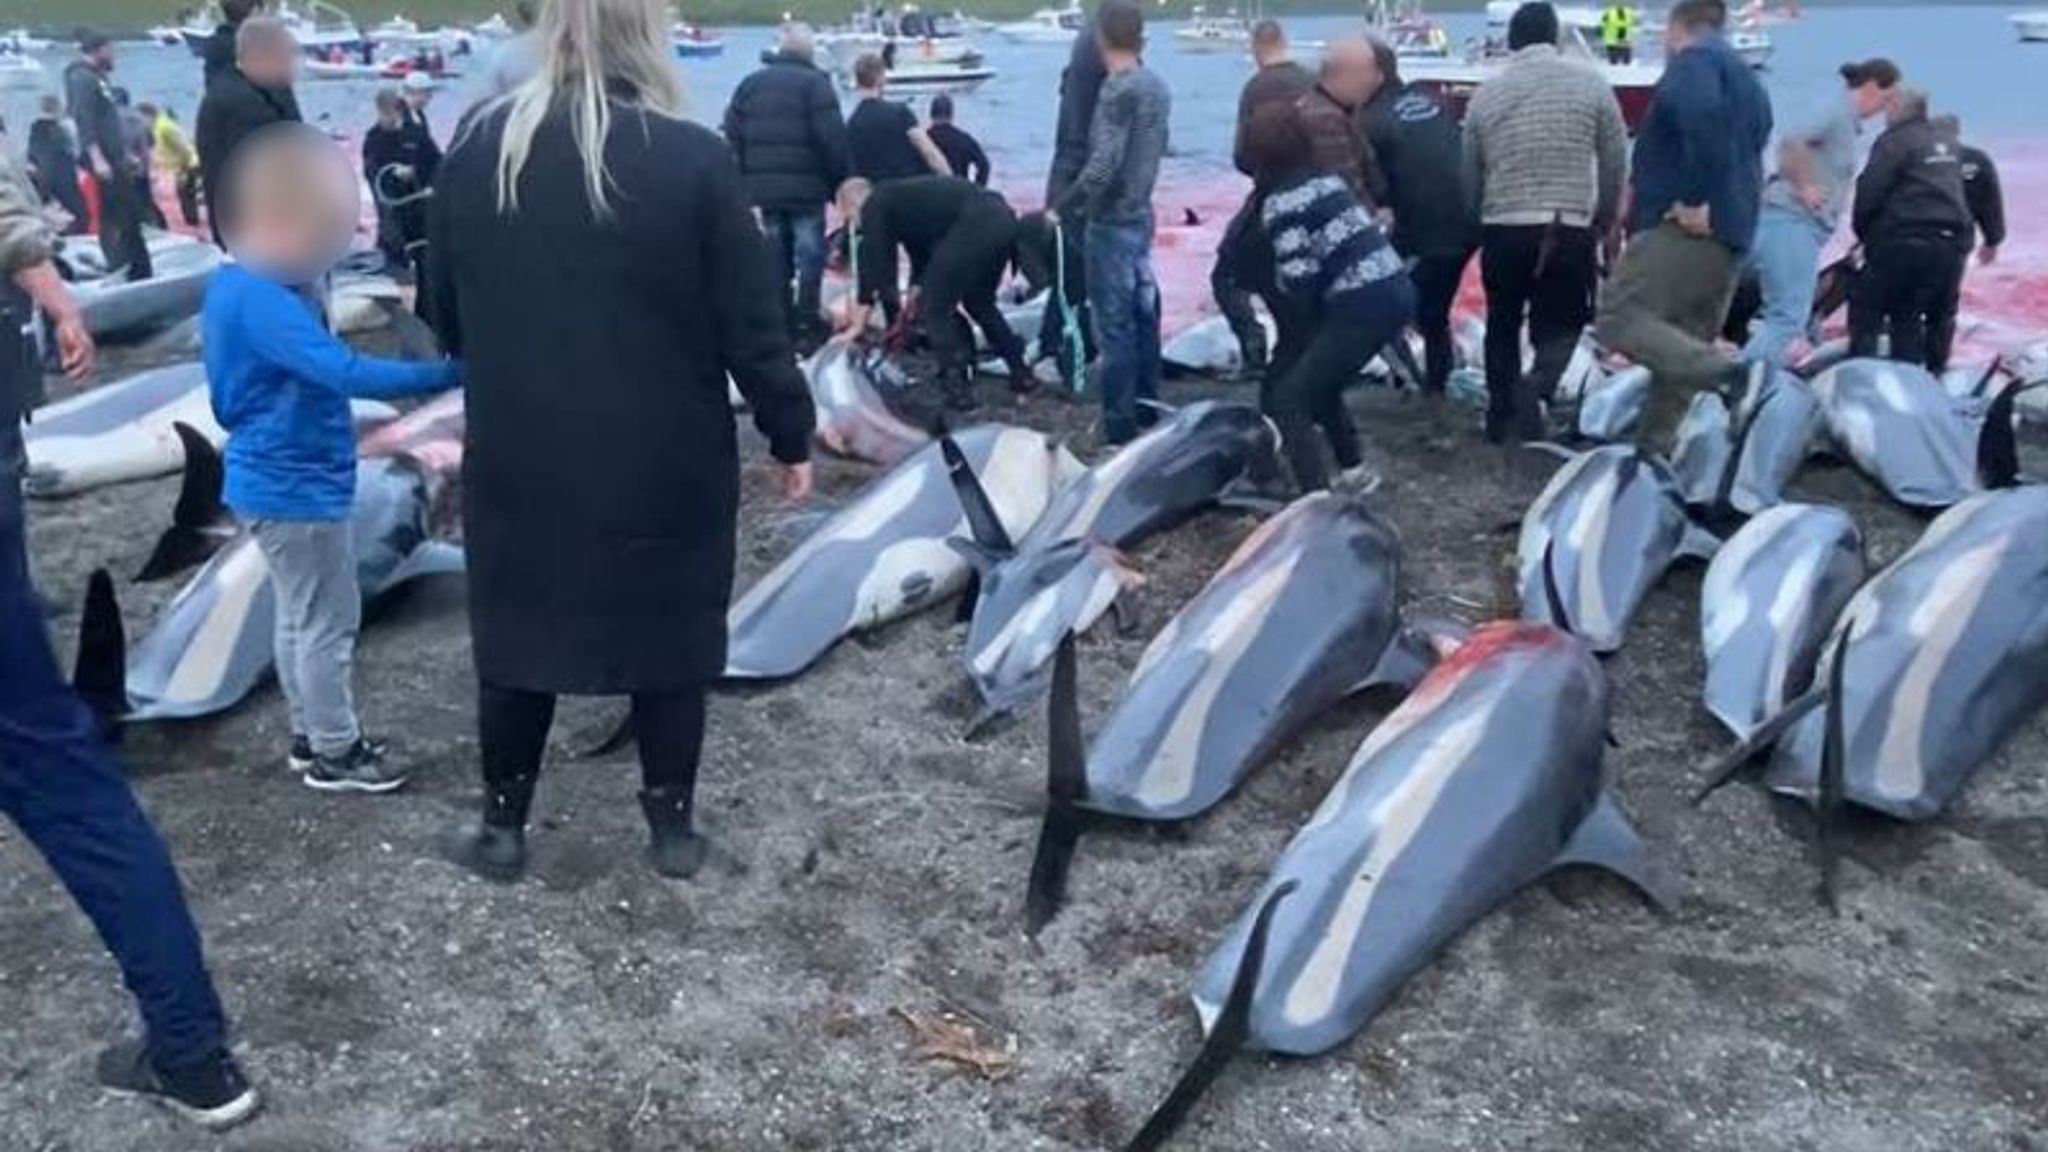 Anger as hundreds of dolphins hunted and killed in annual Faroe Islands slaughter | World News | Sky News